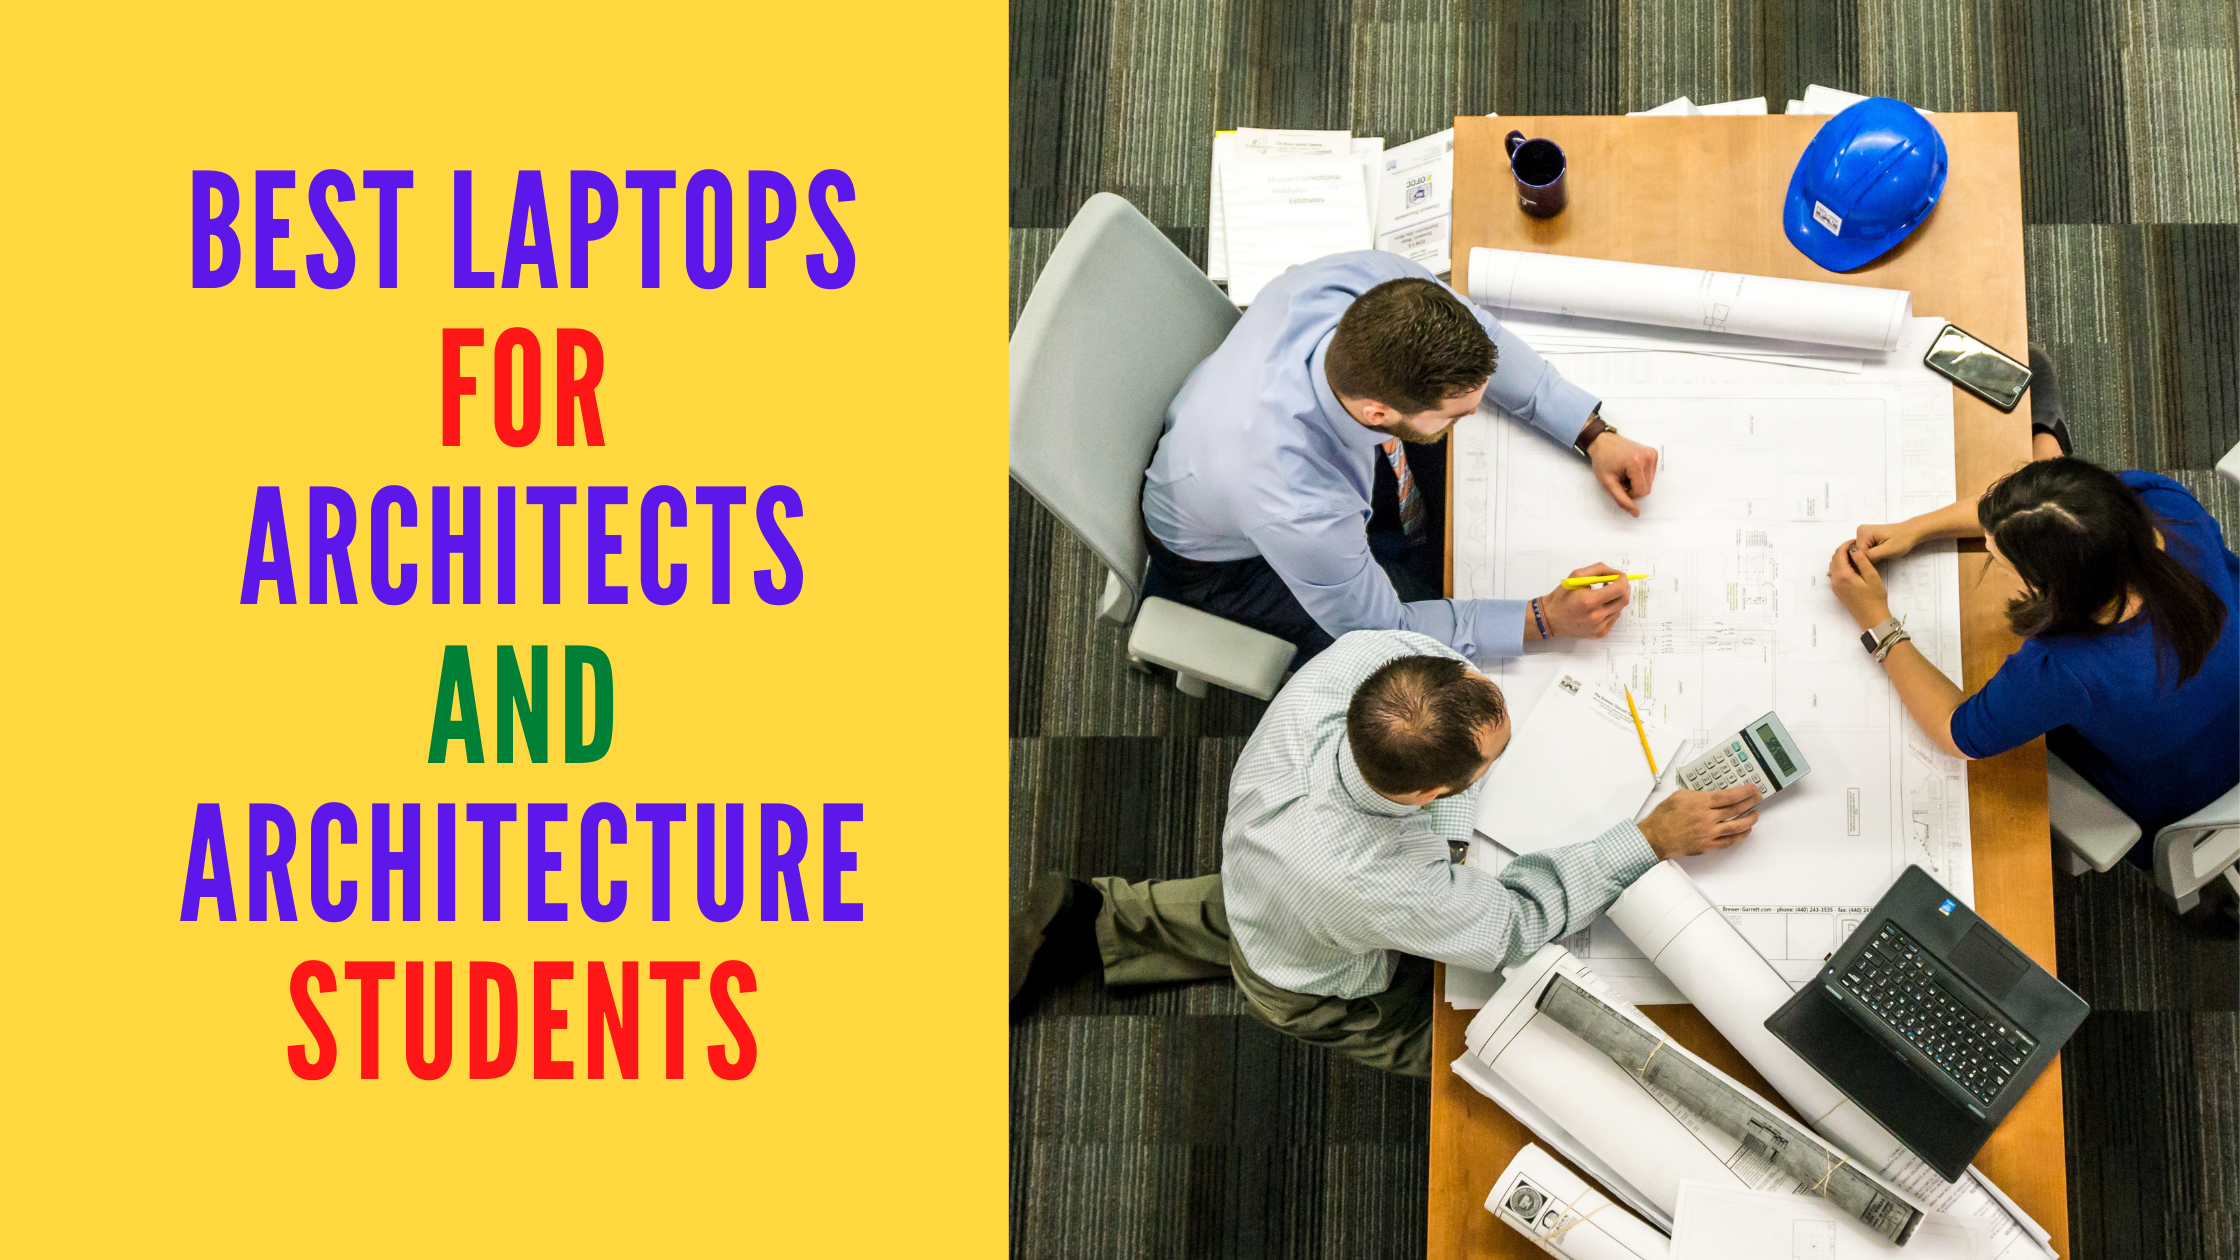 Best Laptops for Architects and Architecture Students